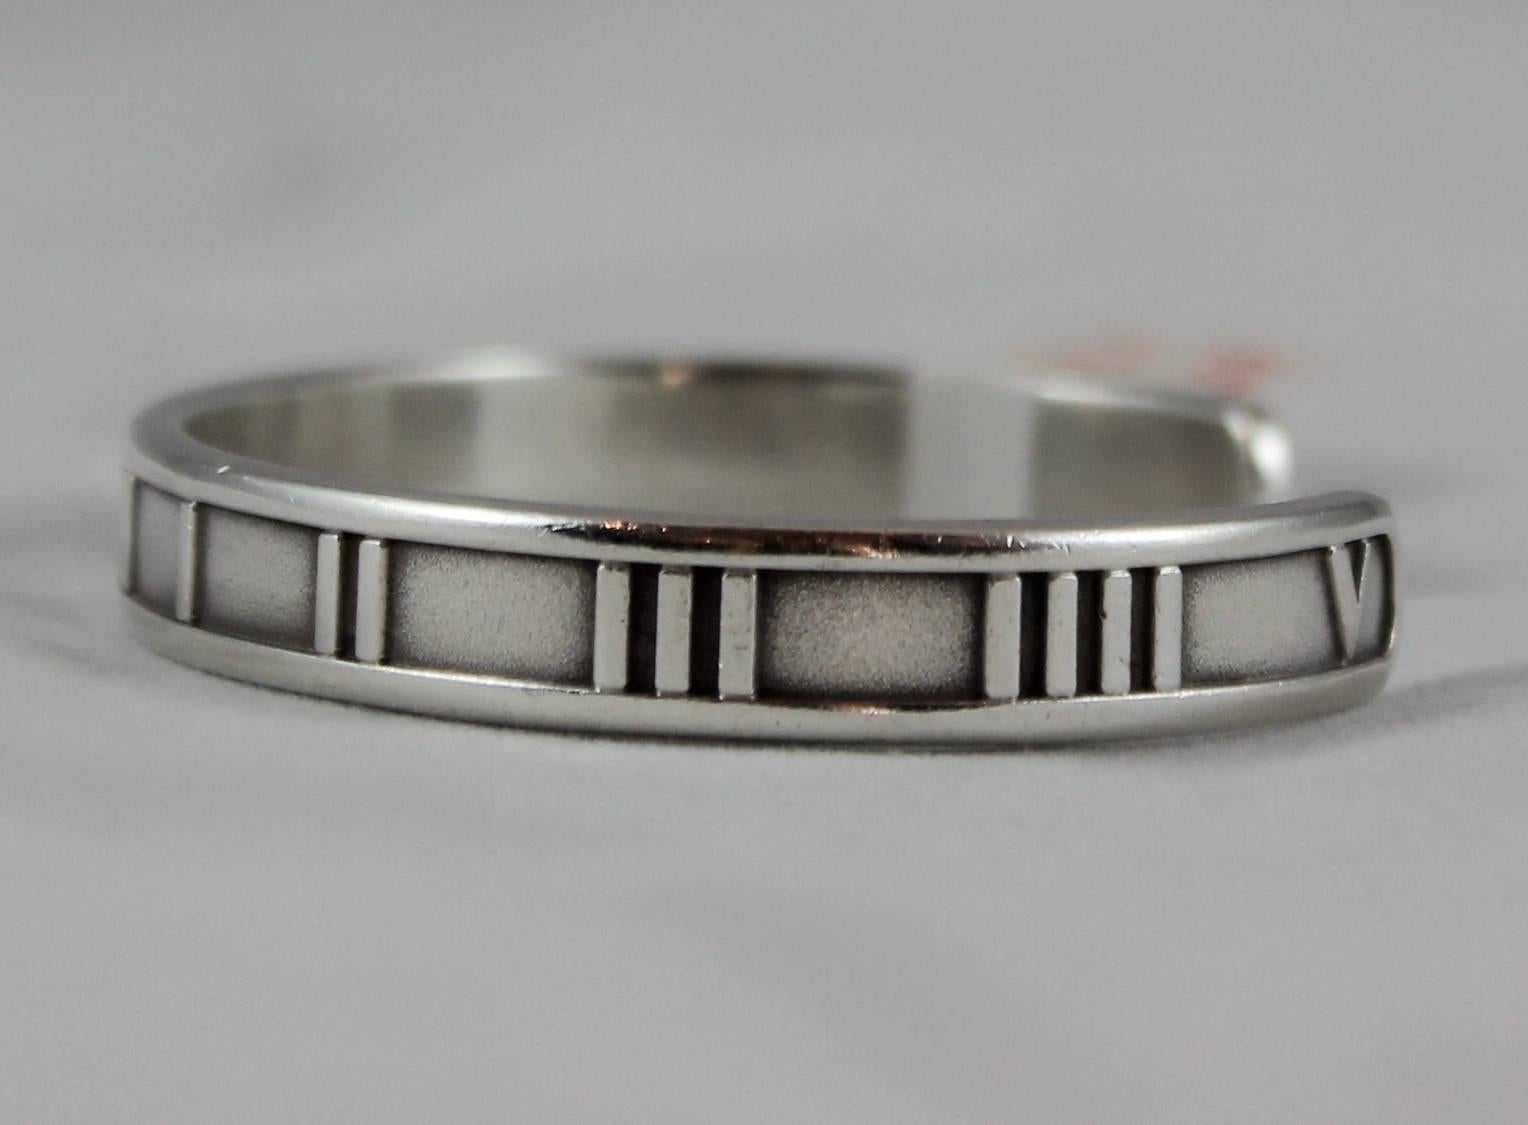 Tiffany & Co. Sterling Silver Atlas Thin Cuff - 1995. This cuff is in excellent vintage condition with light wear consistent with age and minor darkening between the Roman numerals. There is a matching ring available in a size 9.